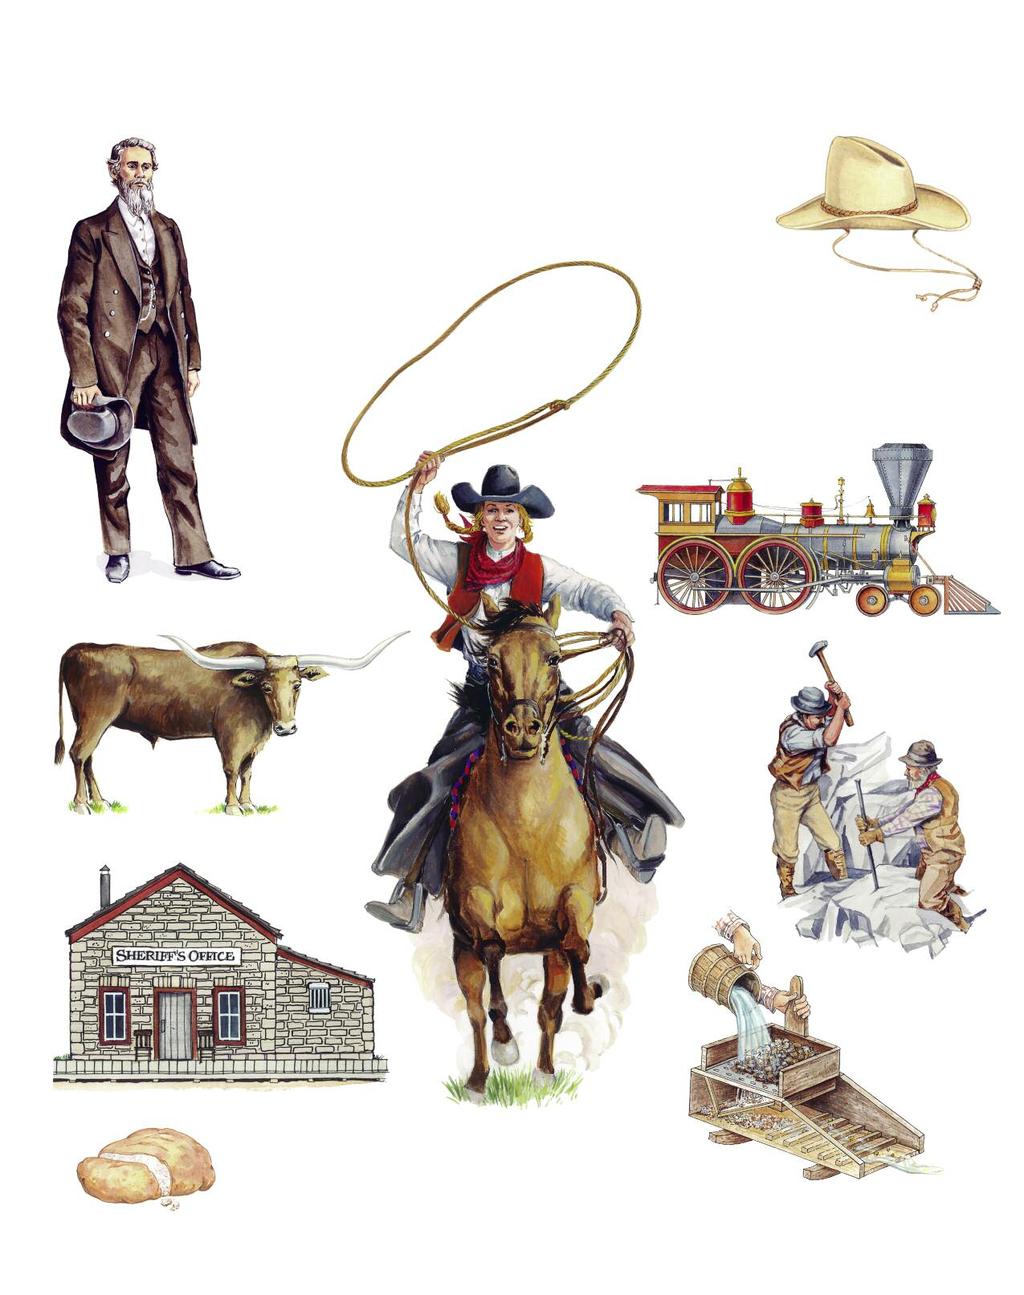 A Visual Dictionary of the OLD WEST